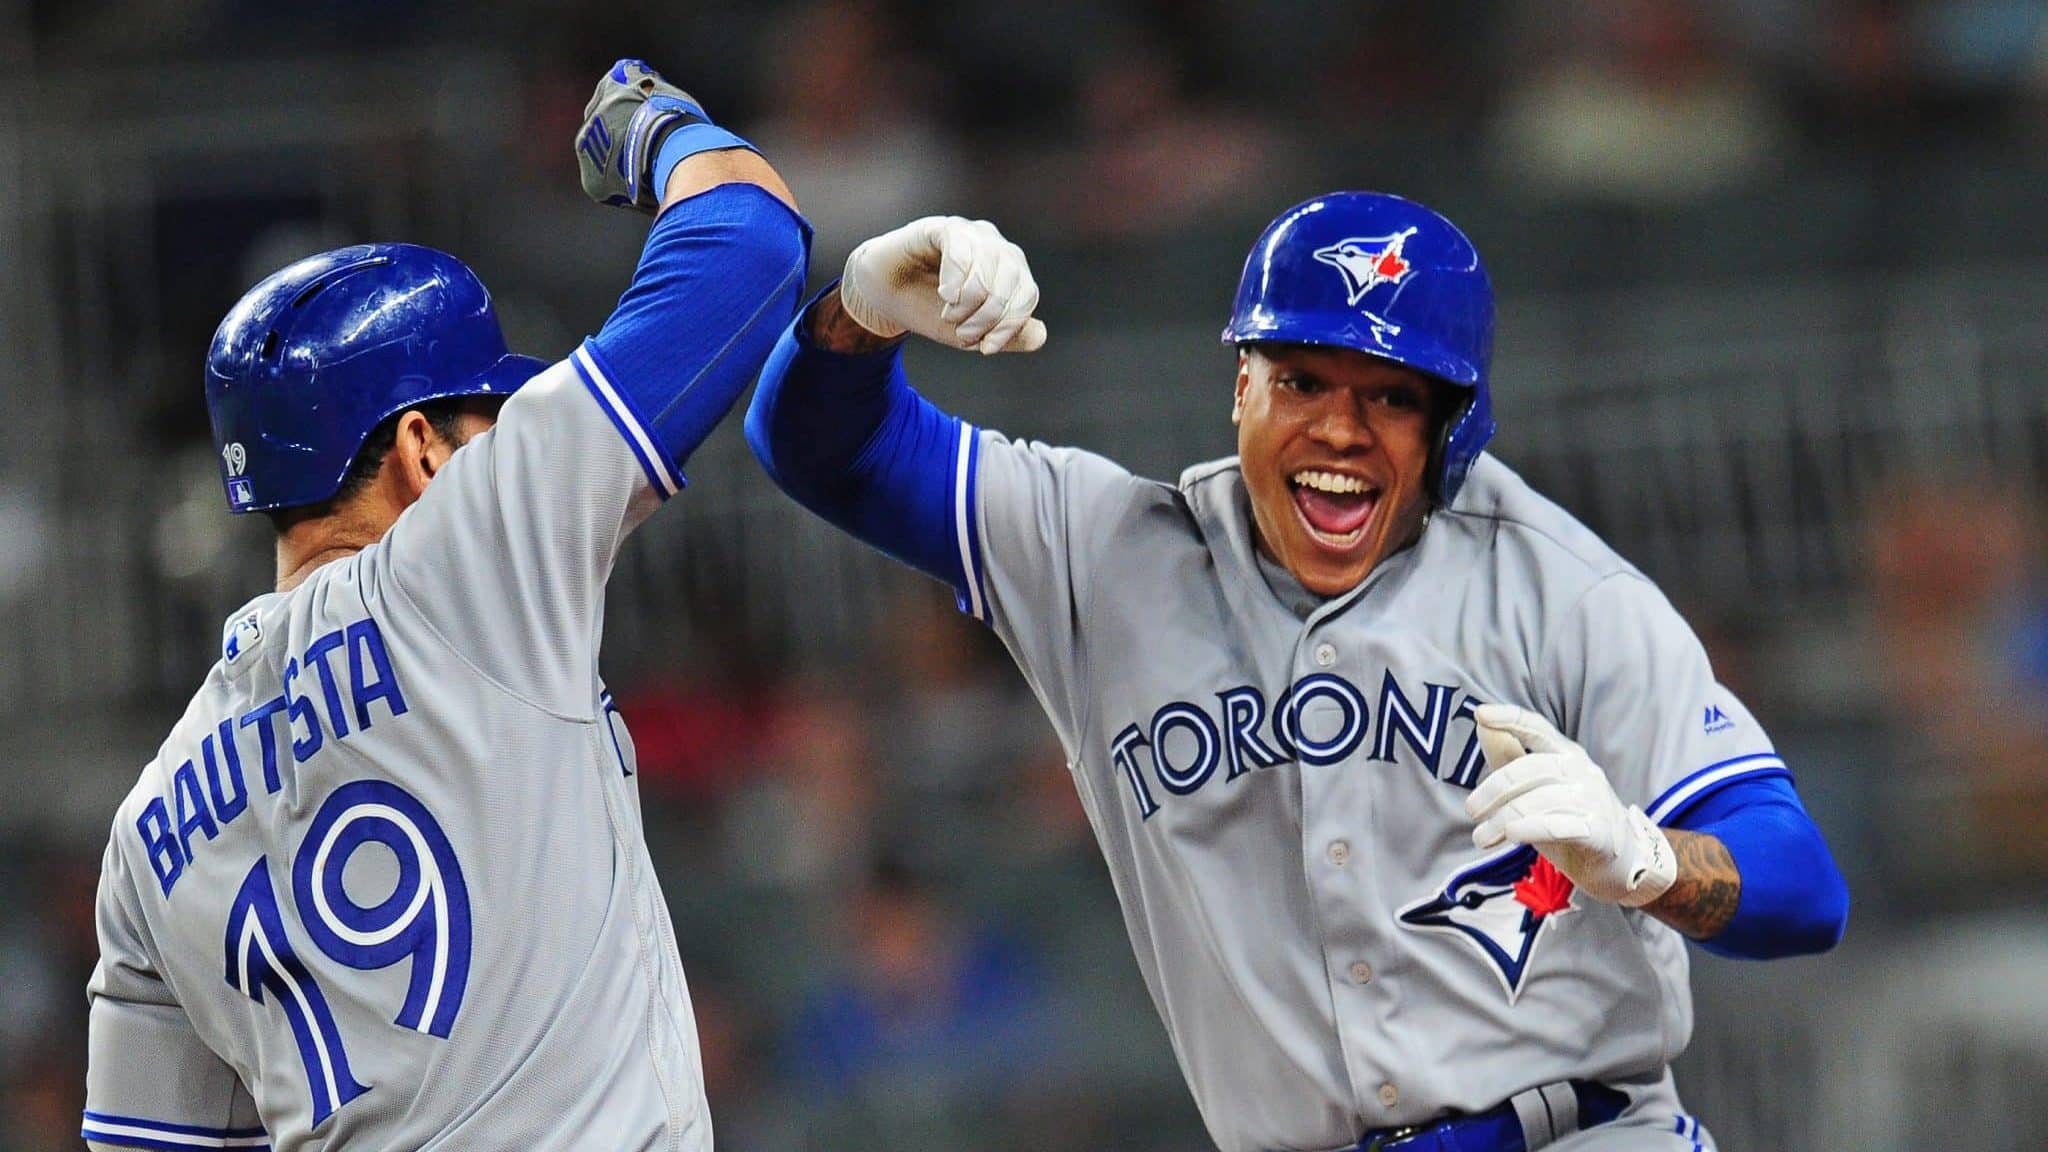 ATLANTA, GA - MAY 18: Marcus Stroman #6 of the Toronto Blue Jays is congratulated by Jose Bautista #19 after hitting a fourth inning solo home run against the Atlanta Braves at SunTrust Park on May 18, 2017 in Atlanta, Georgia.